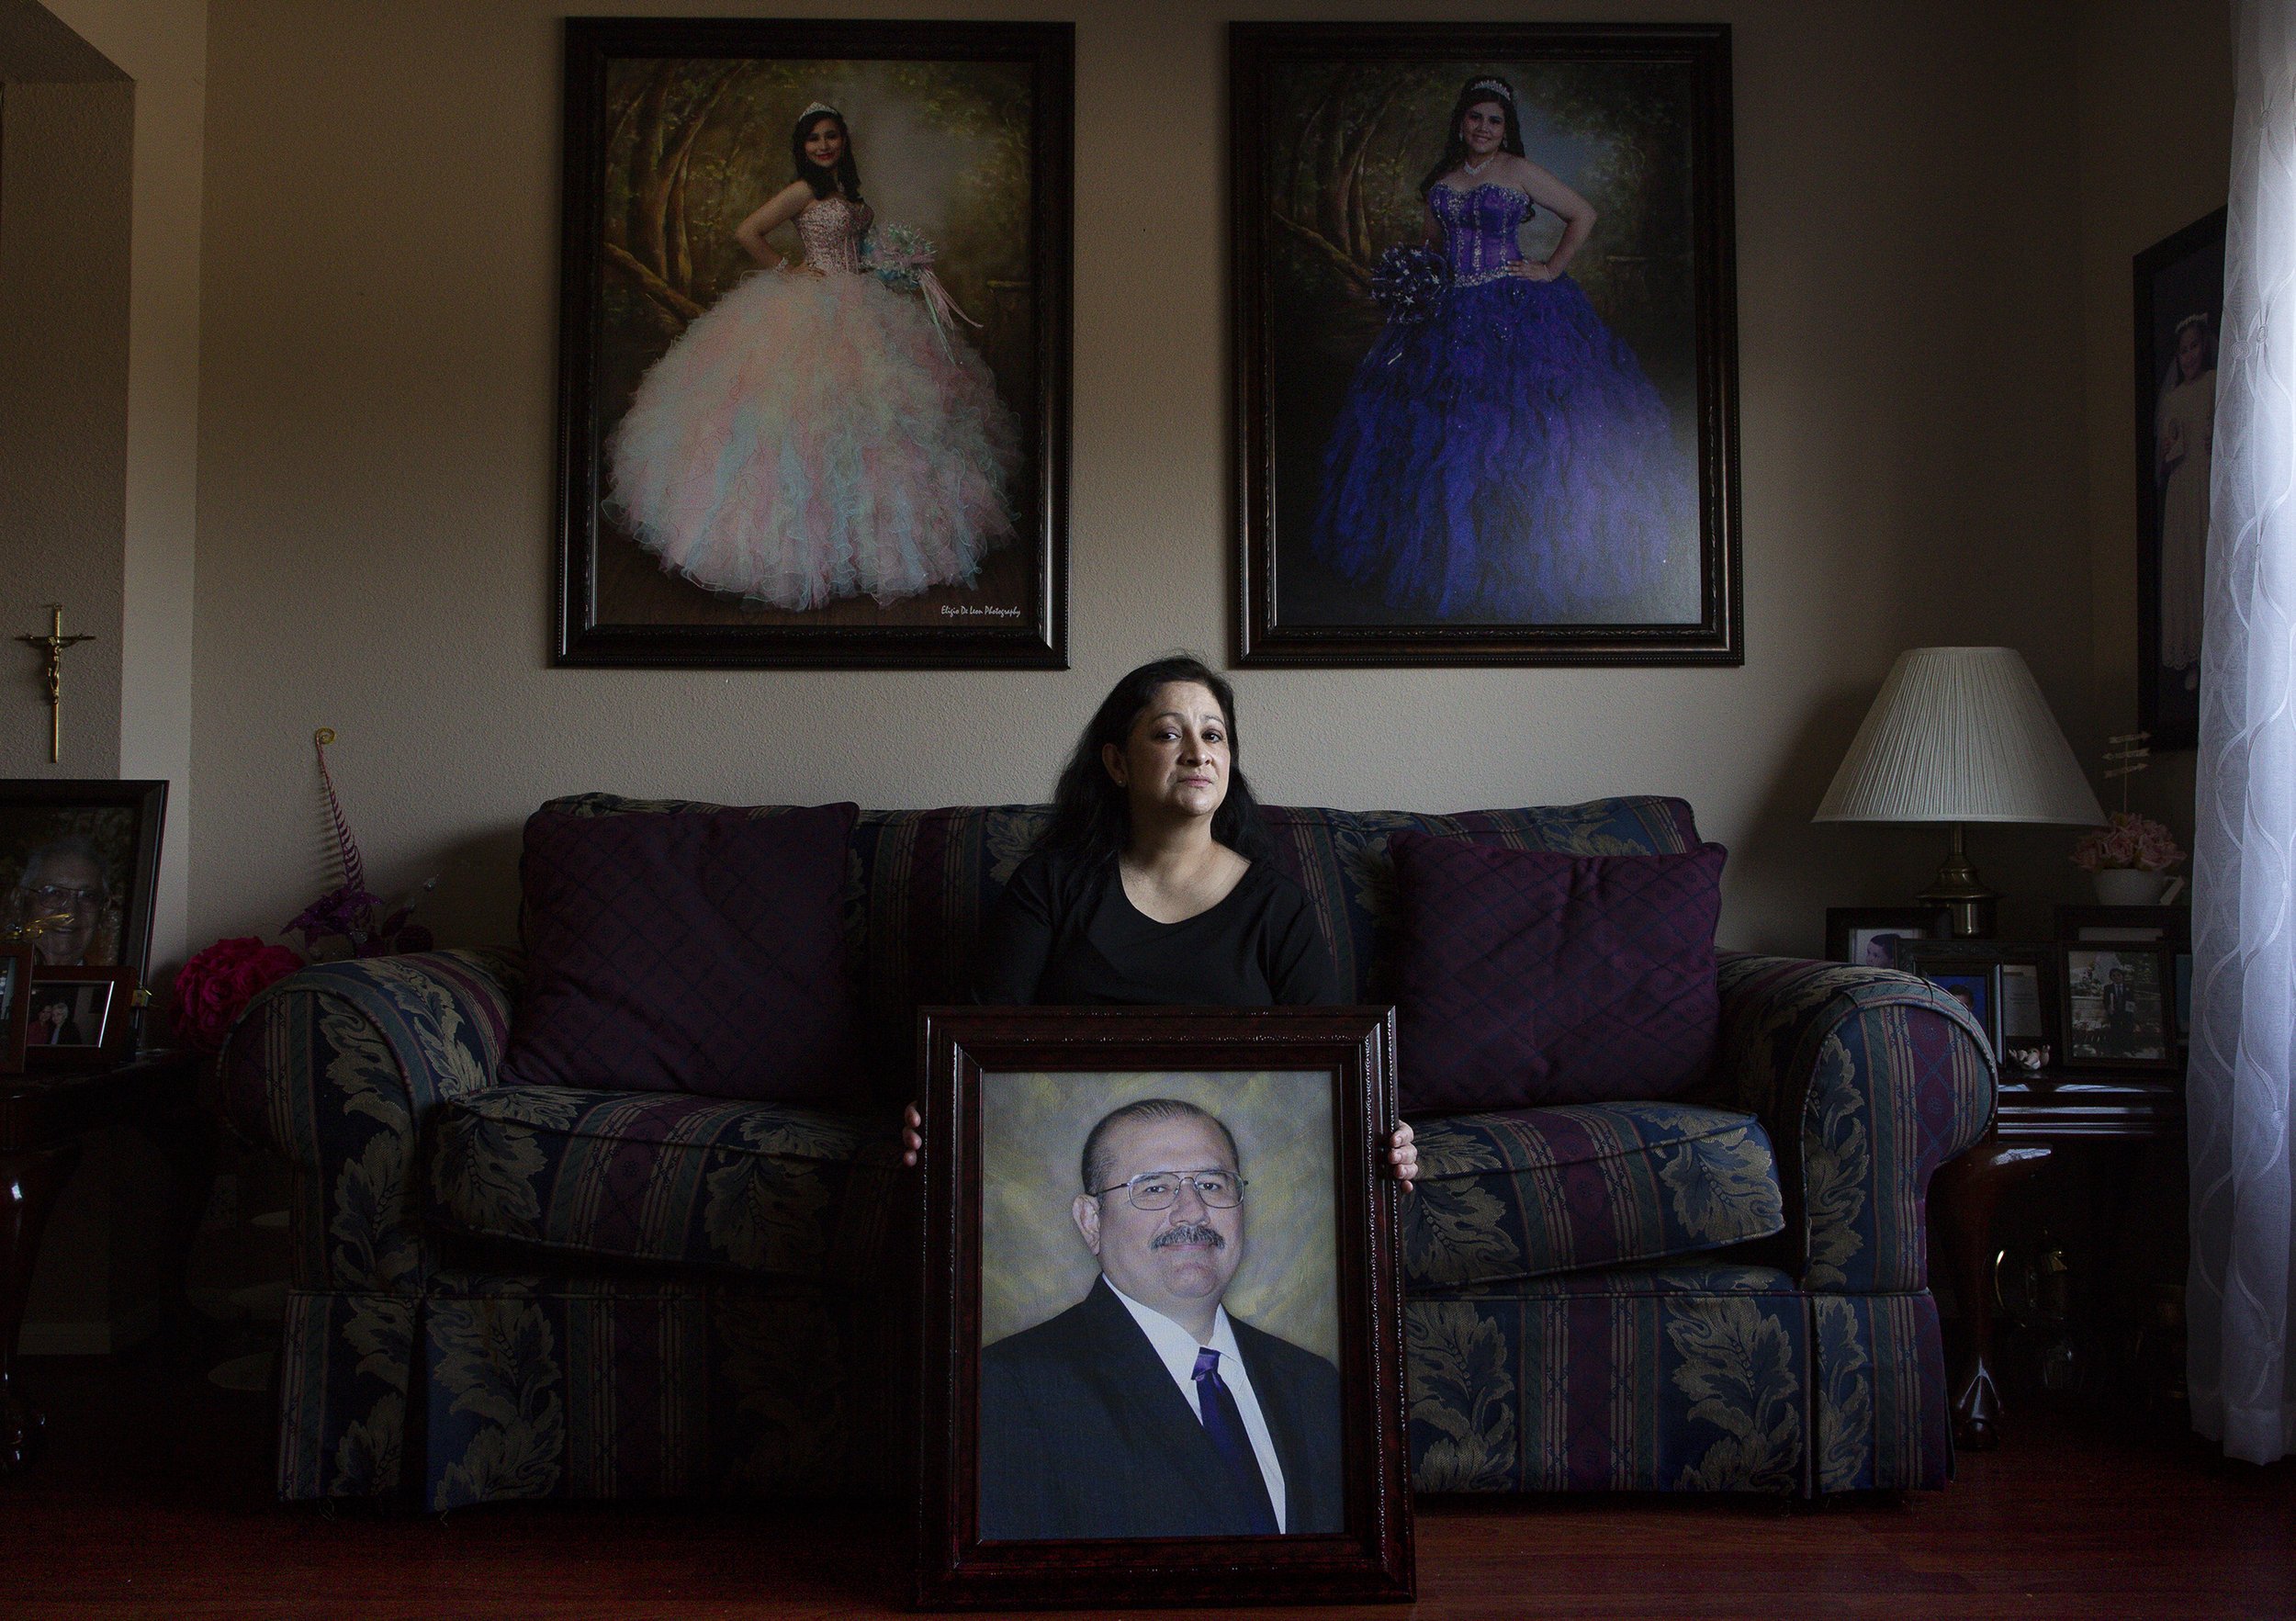  Maria Ortiz poses for a photograph inside her home on Thursday, Jan. 7, 2021, in Houston, Texas. Her husband, Erick Ortiz, died of COVID-19 in early December. His family worries he contracted it at Milby High School, where they say the principal ign